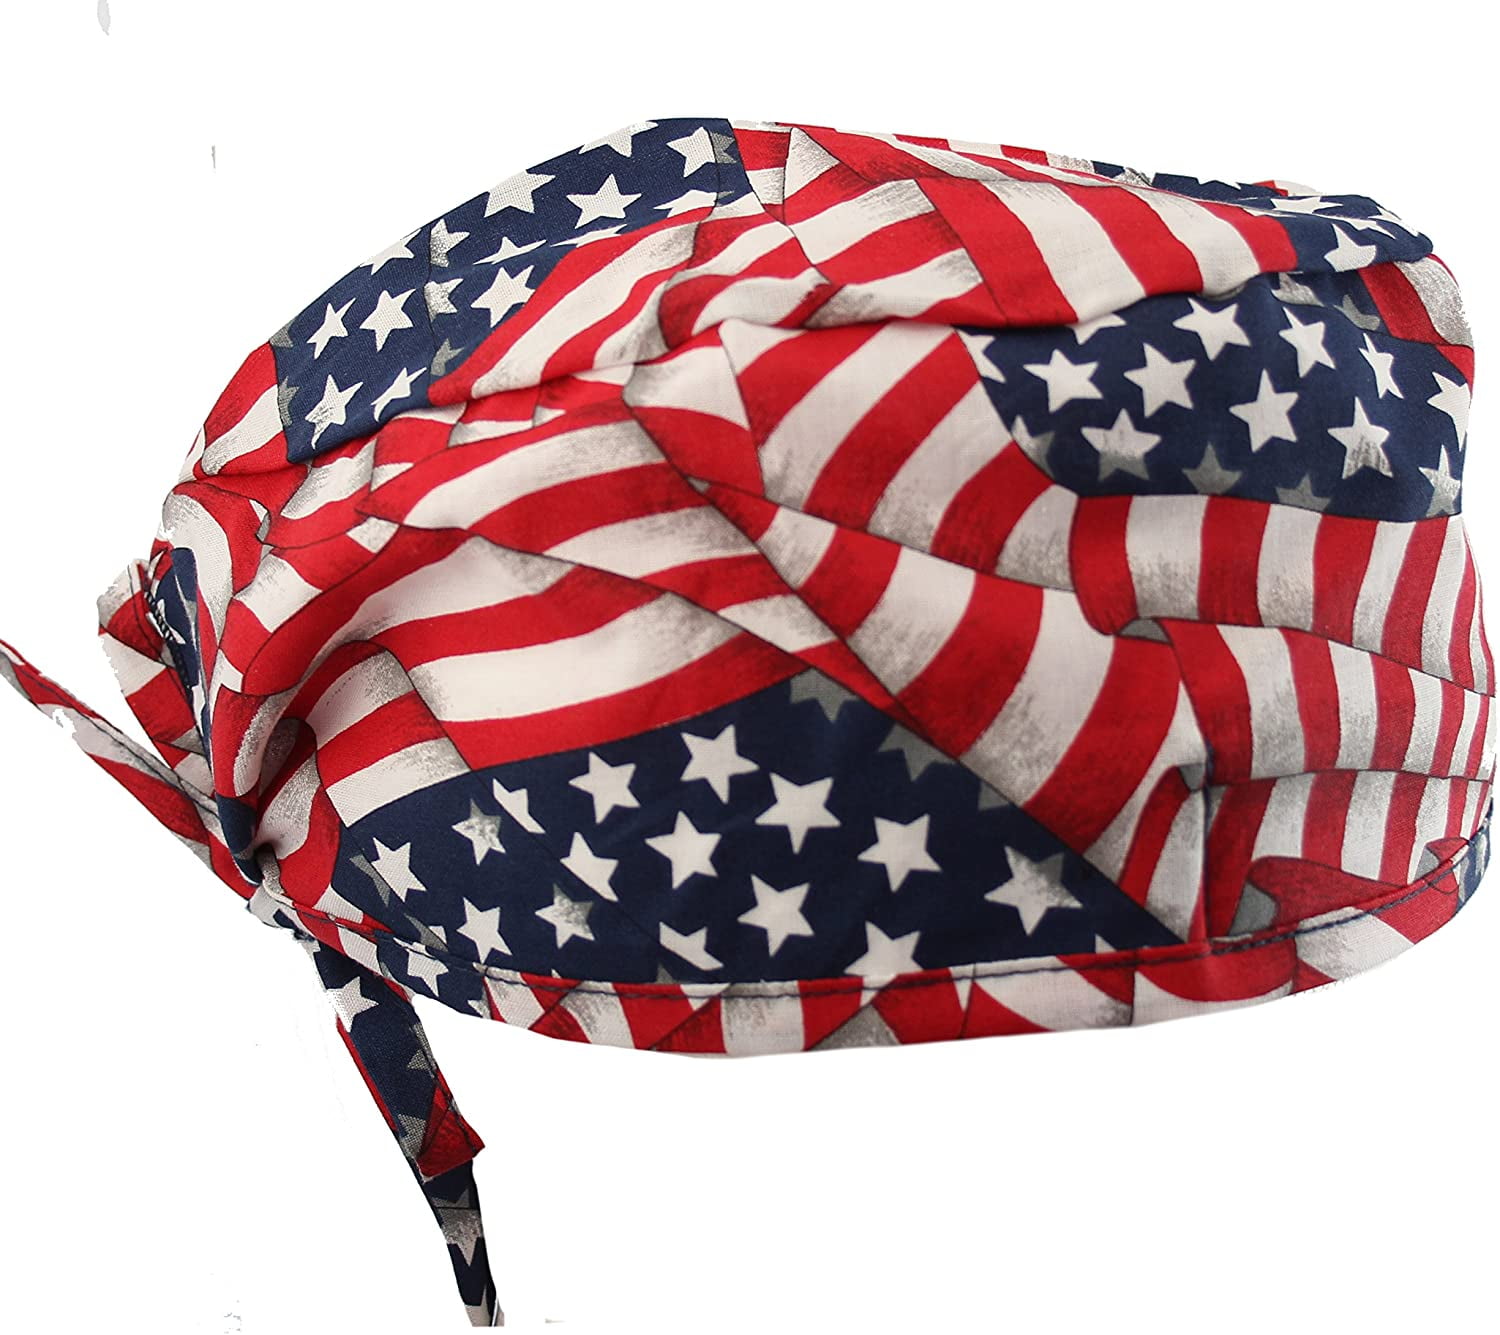 US Army Patriotic Men's Scrub Cap/Hat One size fits most 